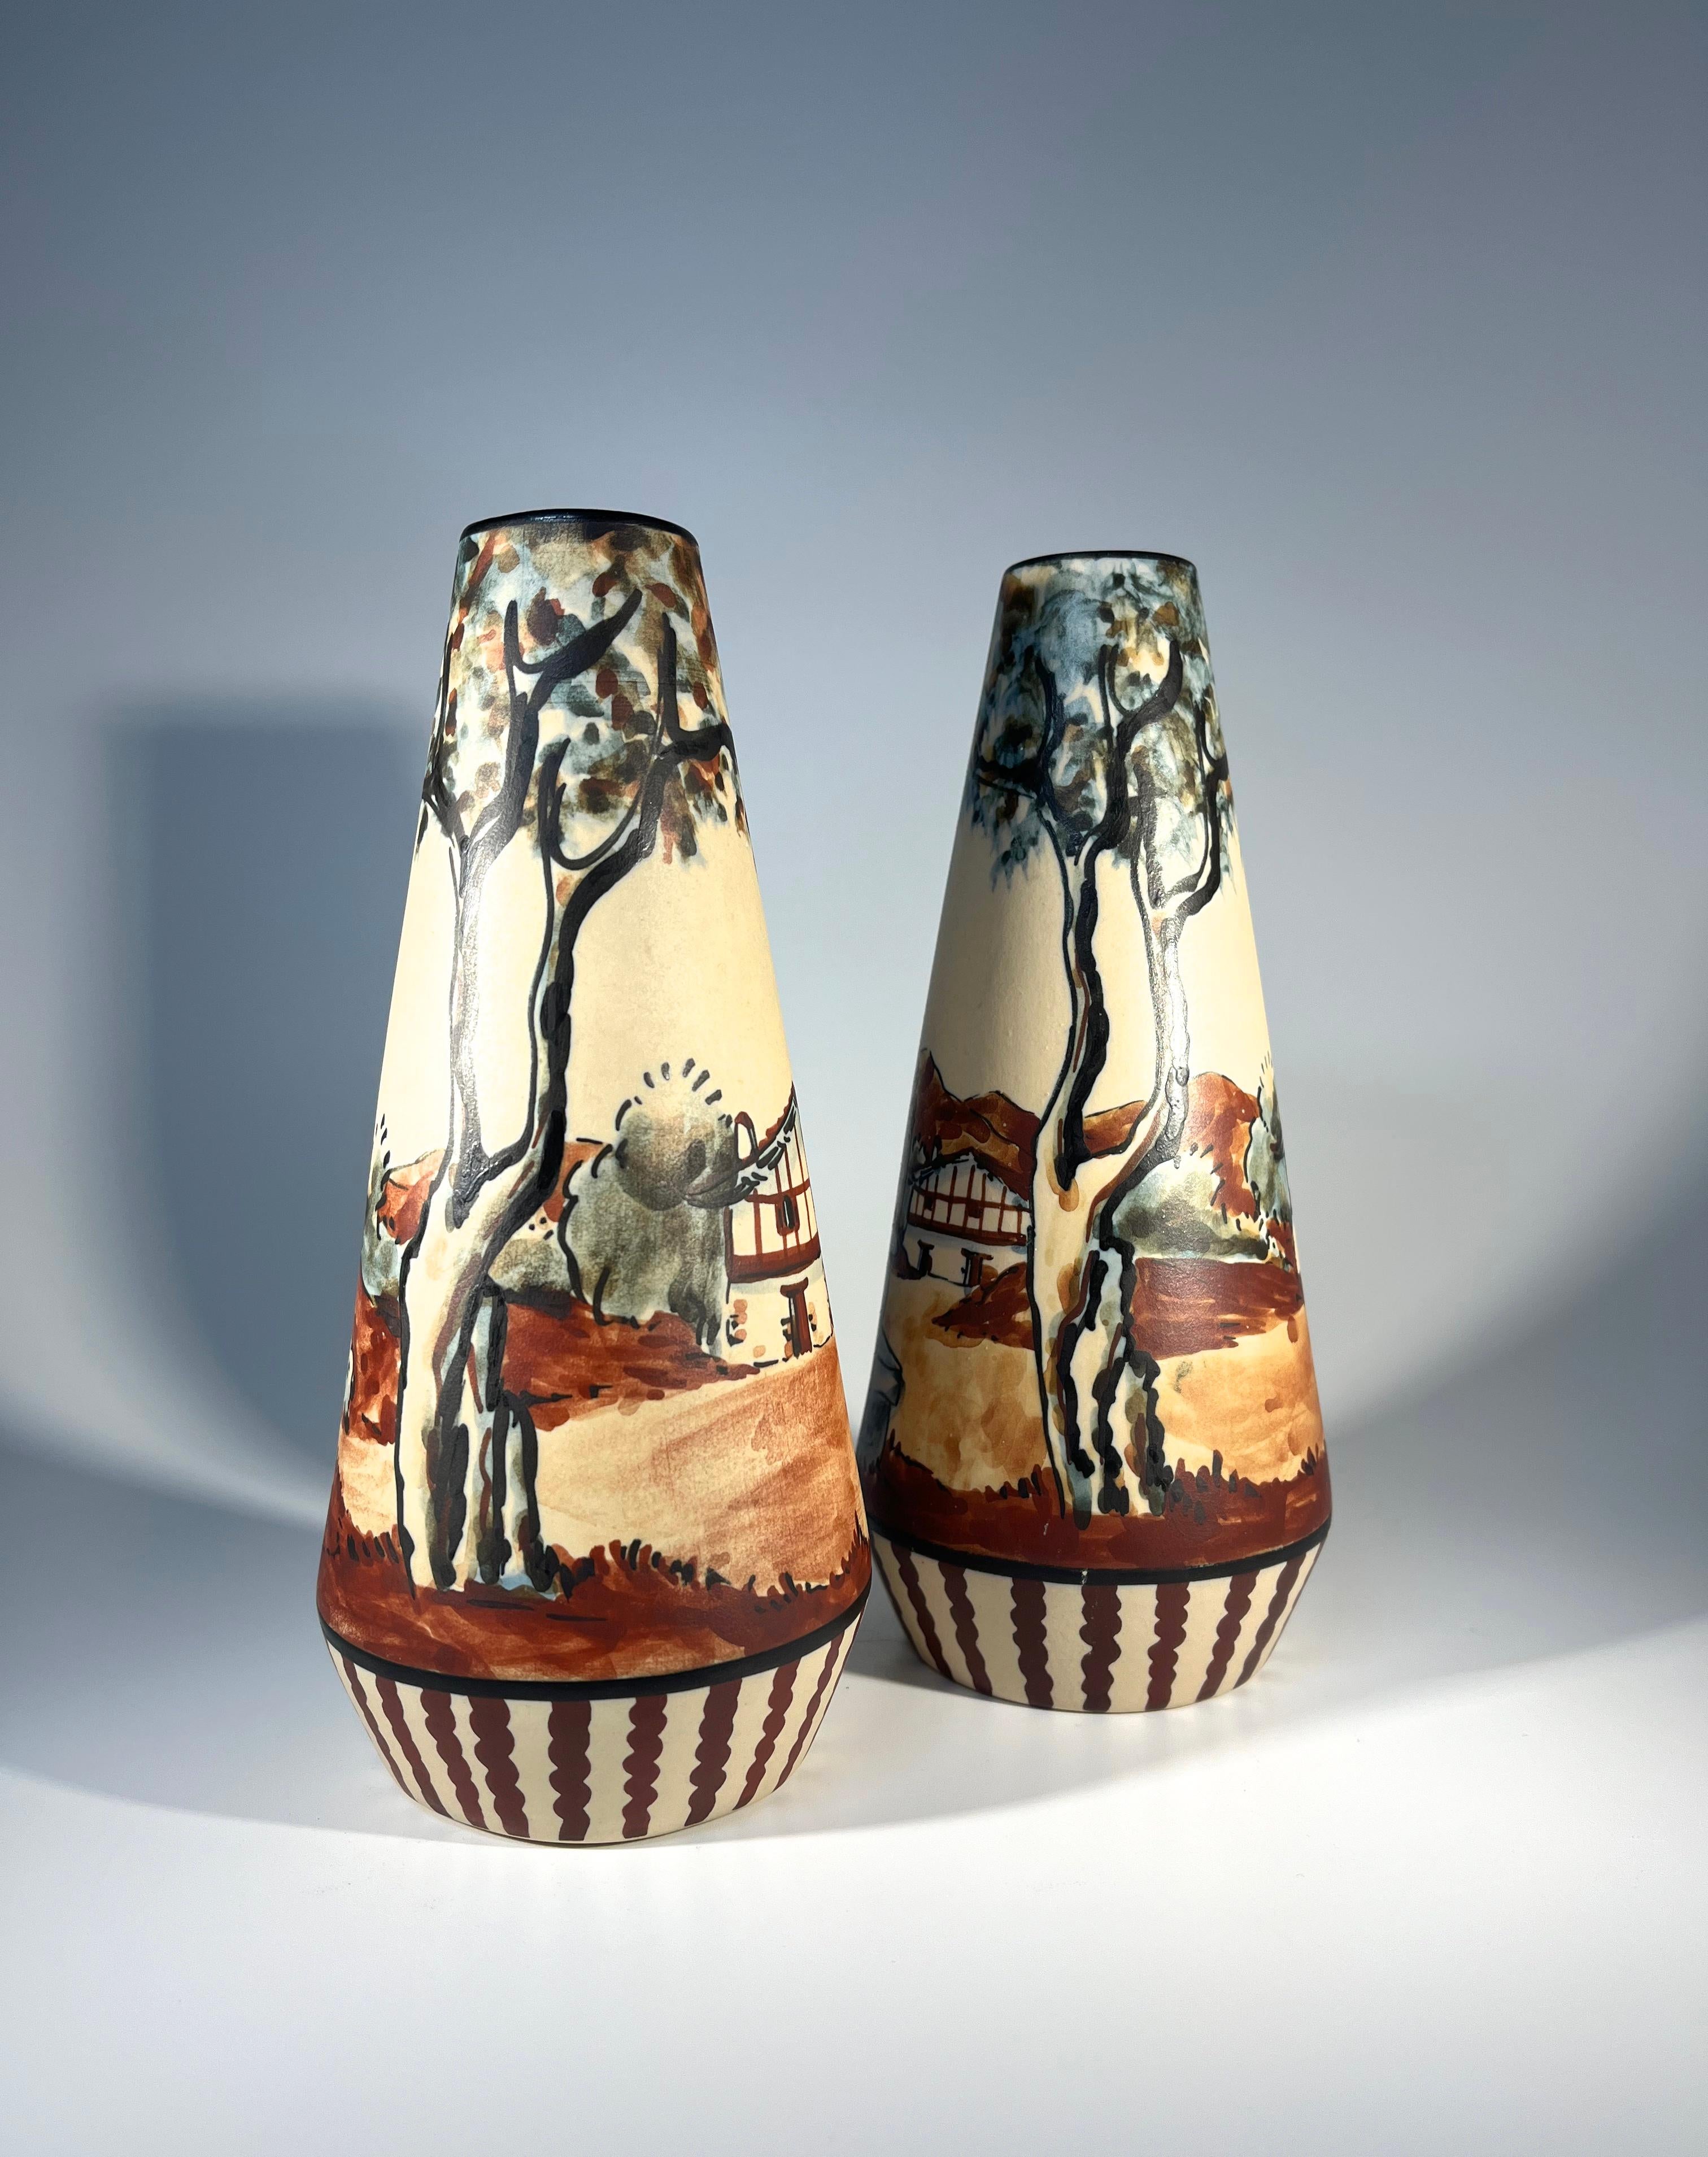 Super pair of typical Ciboure stoneware tapered vases by Anne Marie Grillard for Ciboure, France
Hand decorated with a shepherd tending his flock on one and an animated musician on the other
Albeit a pair, there is a minute difference in